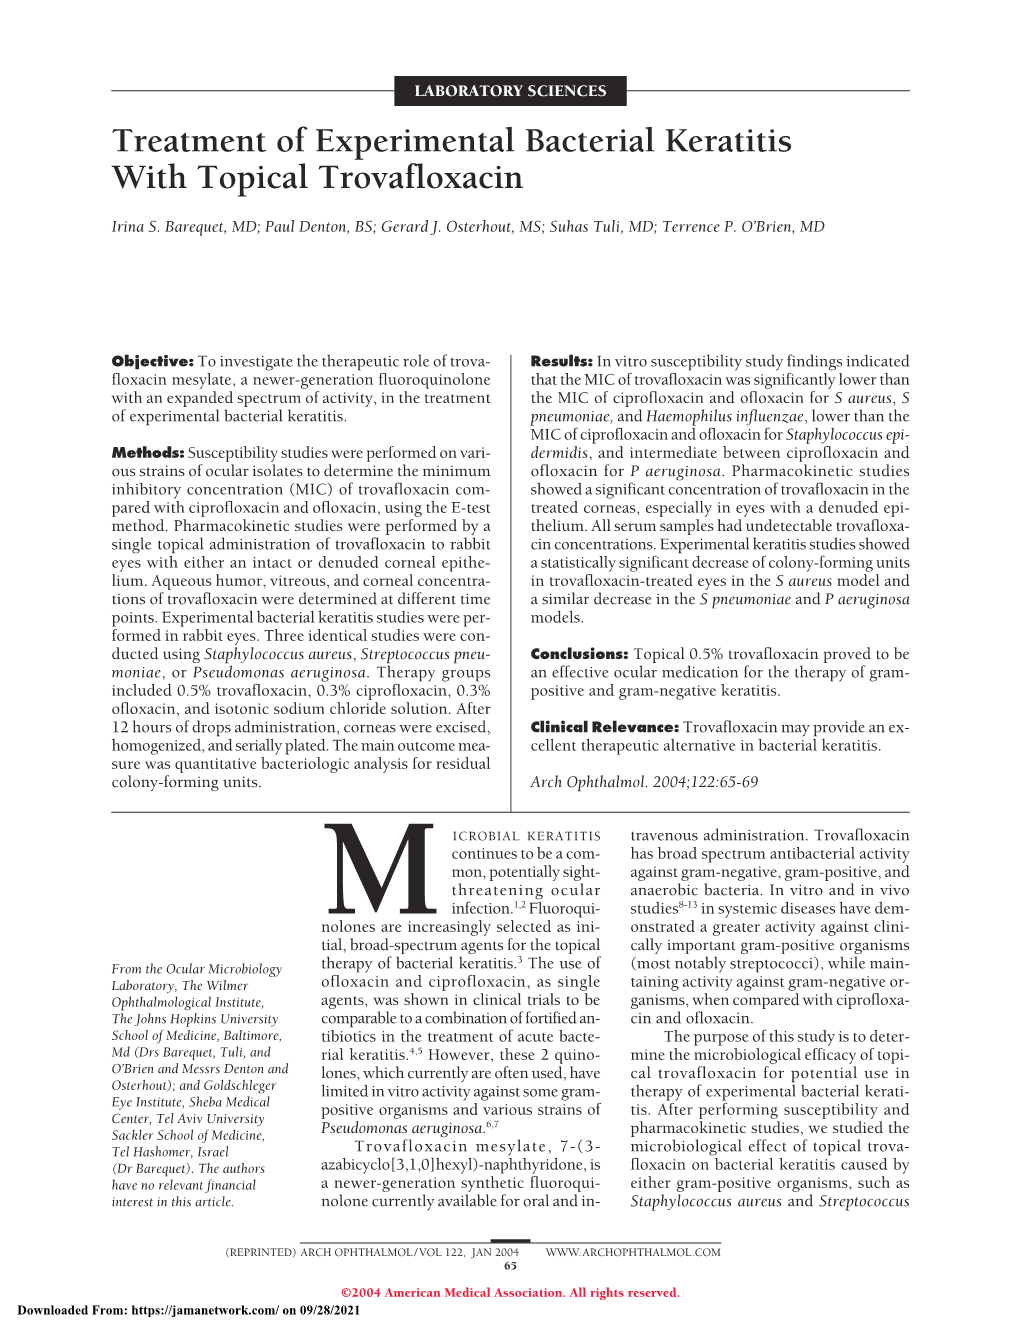 Treatment of Experimental Bacterial Keratitis with Topical Trovafloxacin